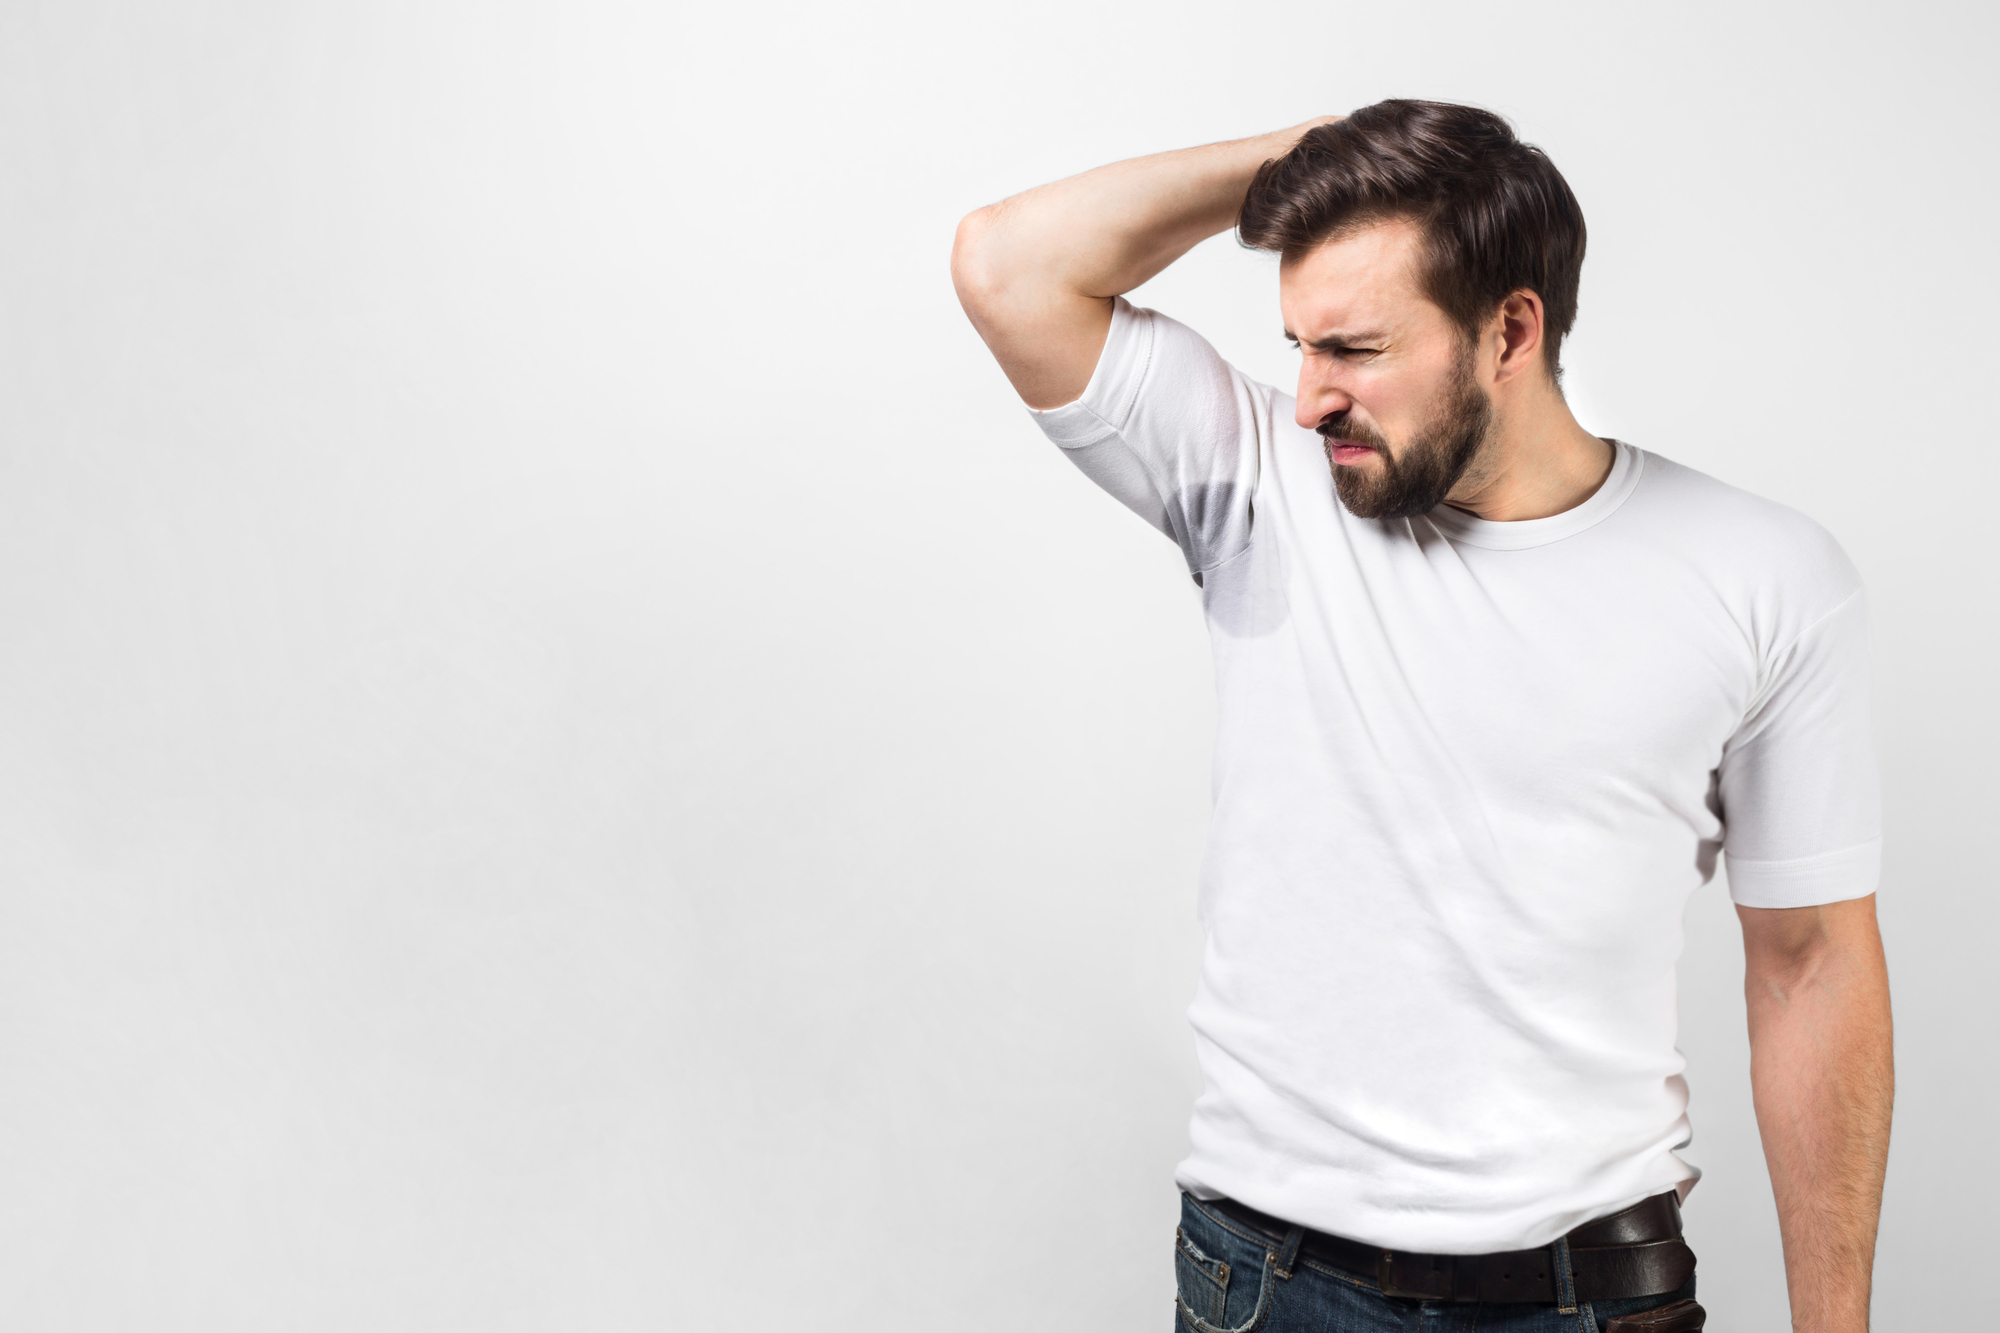 A man in a white t-shirt is standing against a plain white background. He has a pained expression on his face while raising his right arm to check his armpit, appearing to be concerned about sweat or body odor.